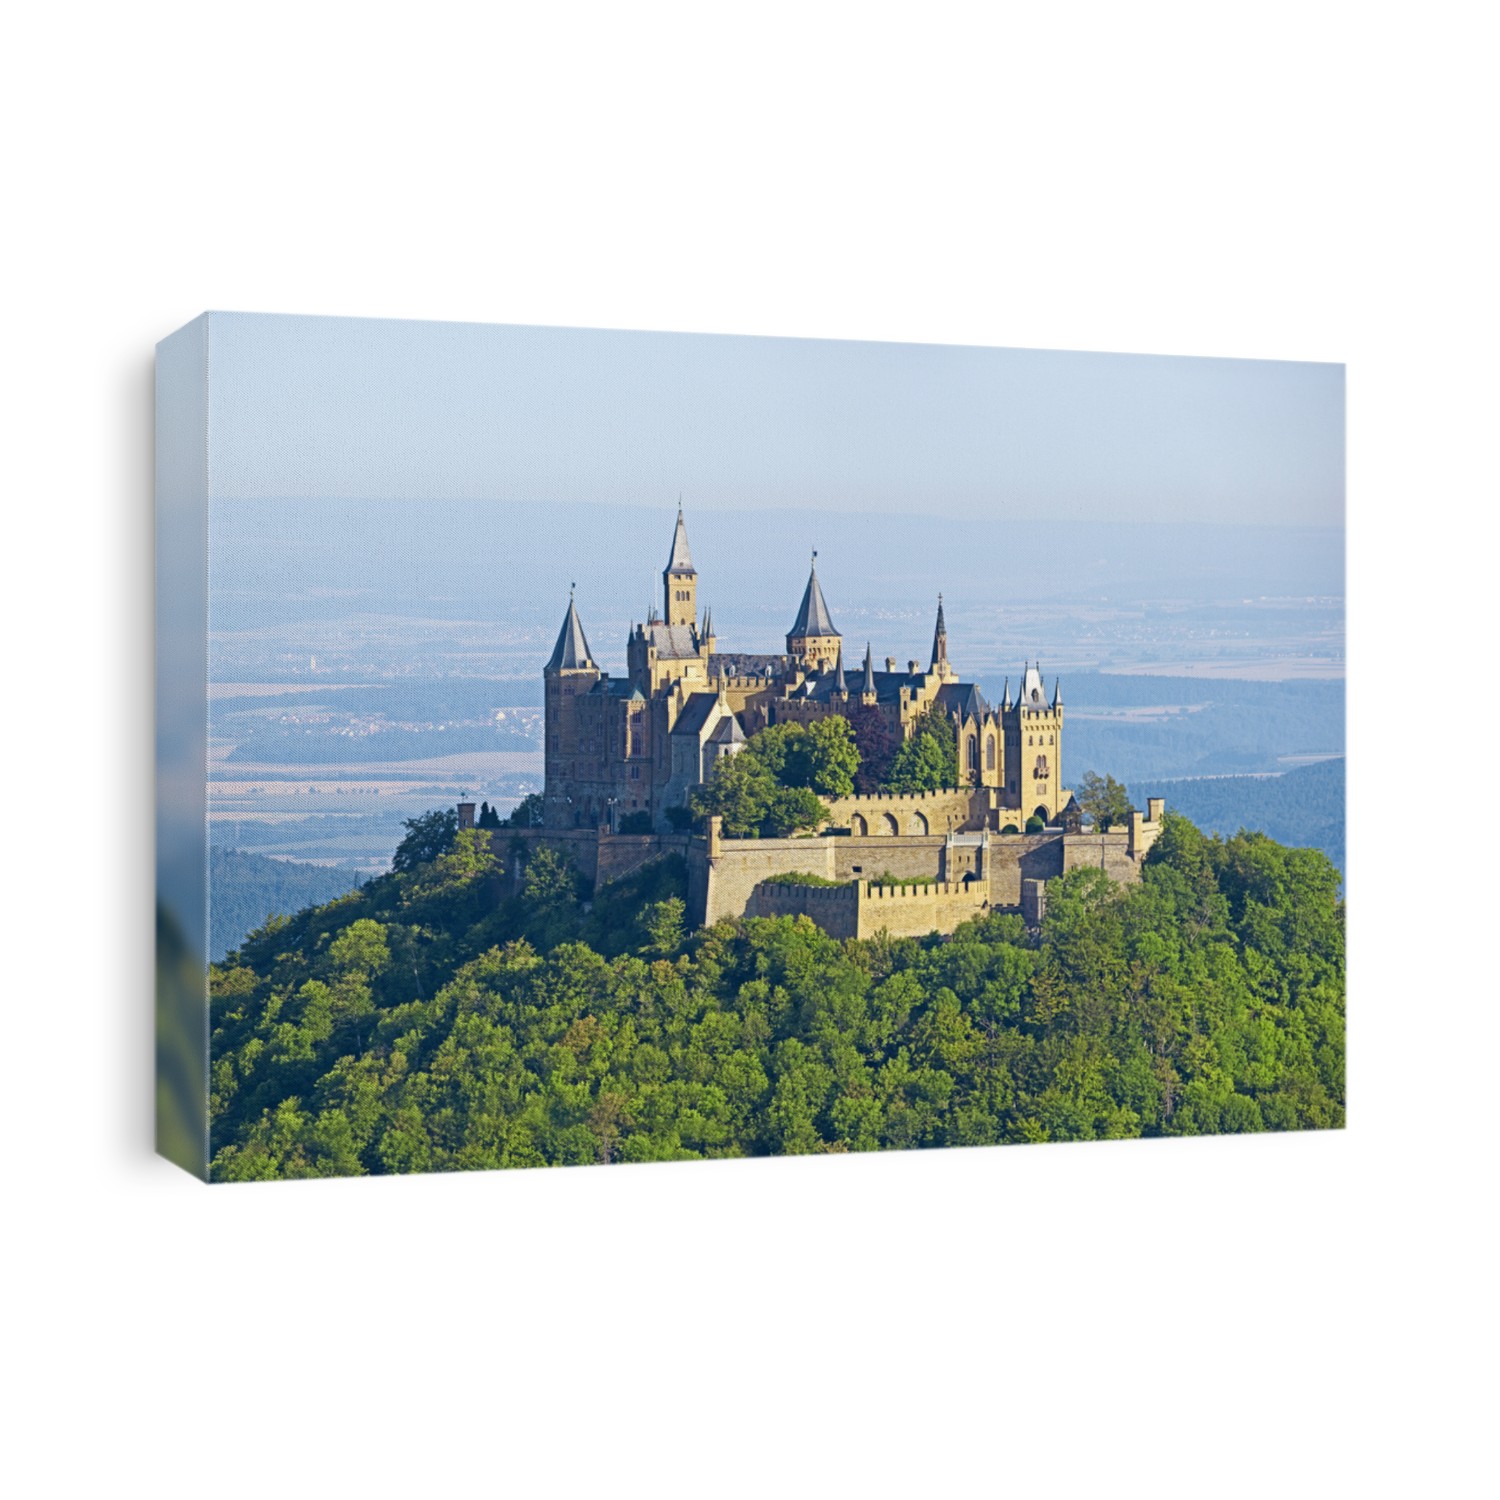 castle Hohenzollern in Germany